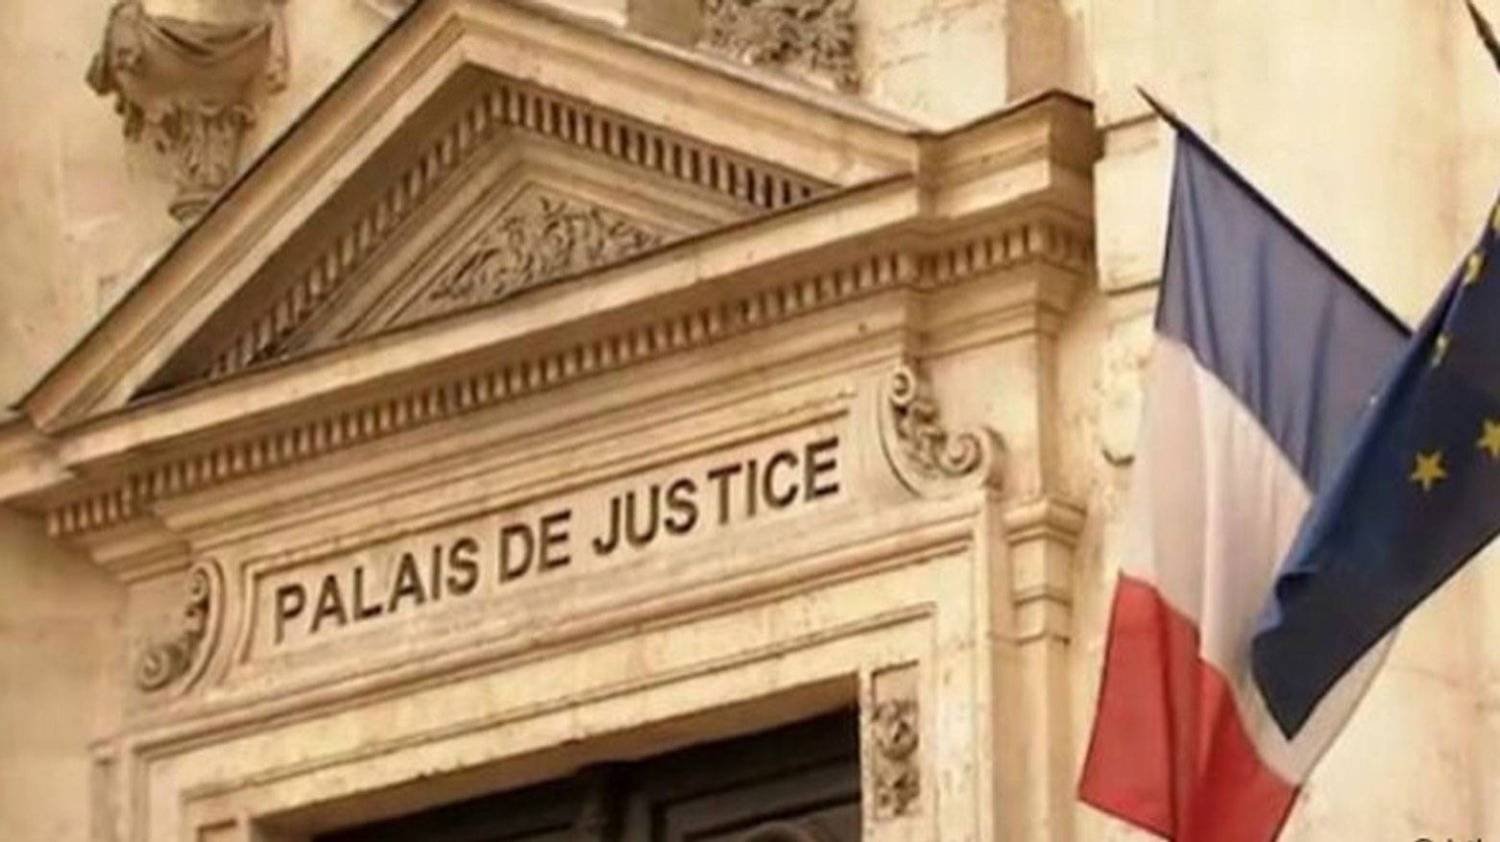 Palace of Justice in Paris. (viral photo)

